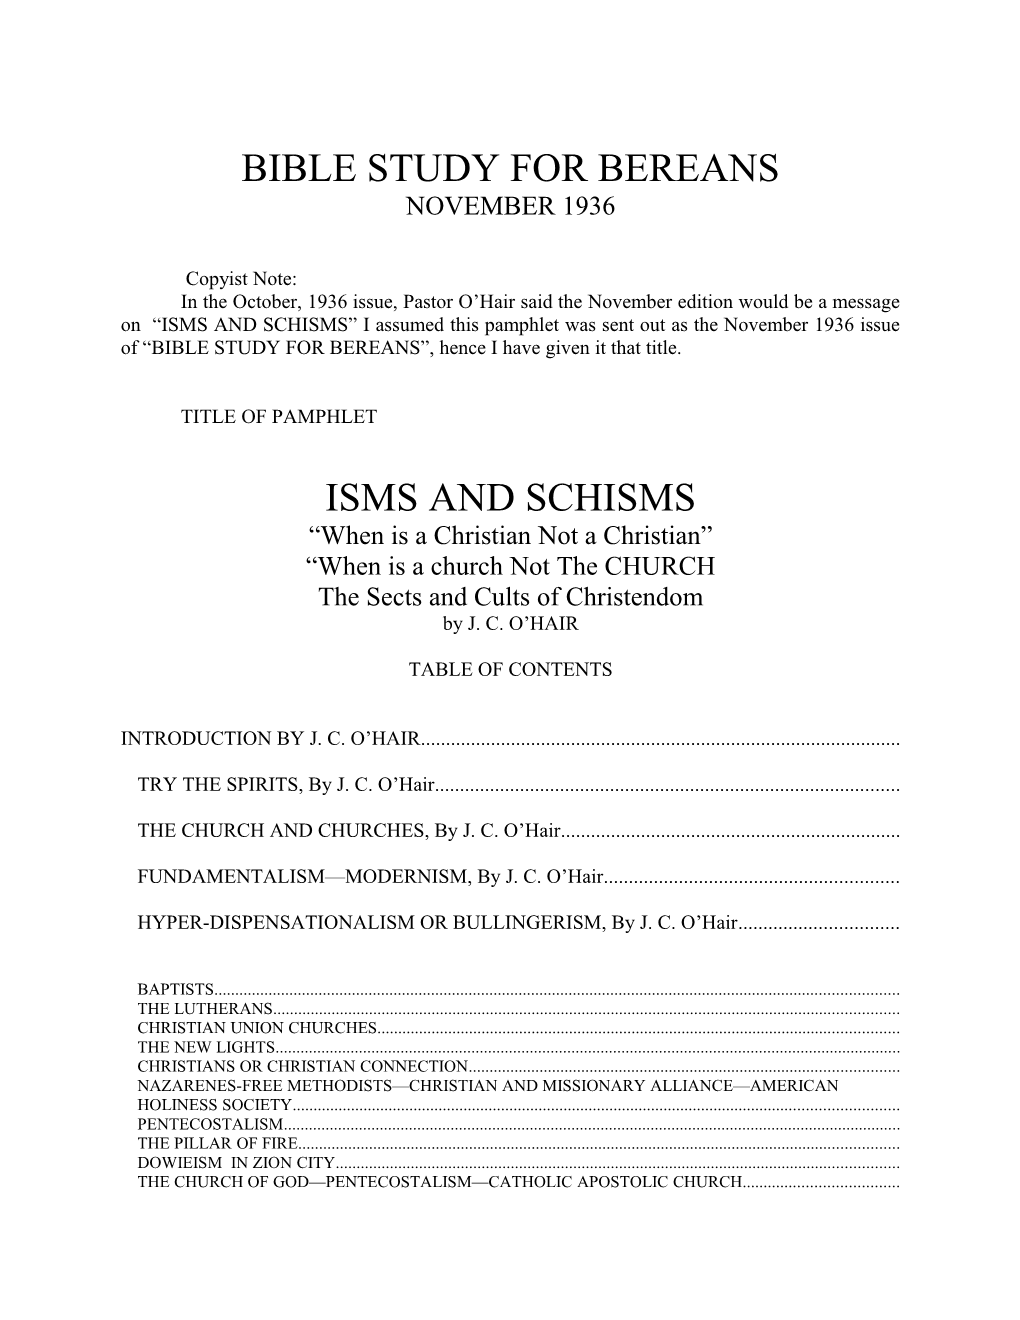 Isms and Schisms